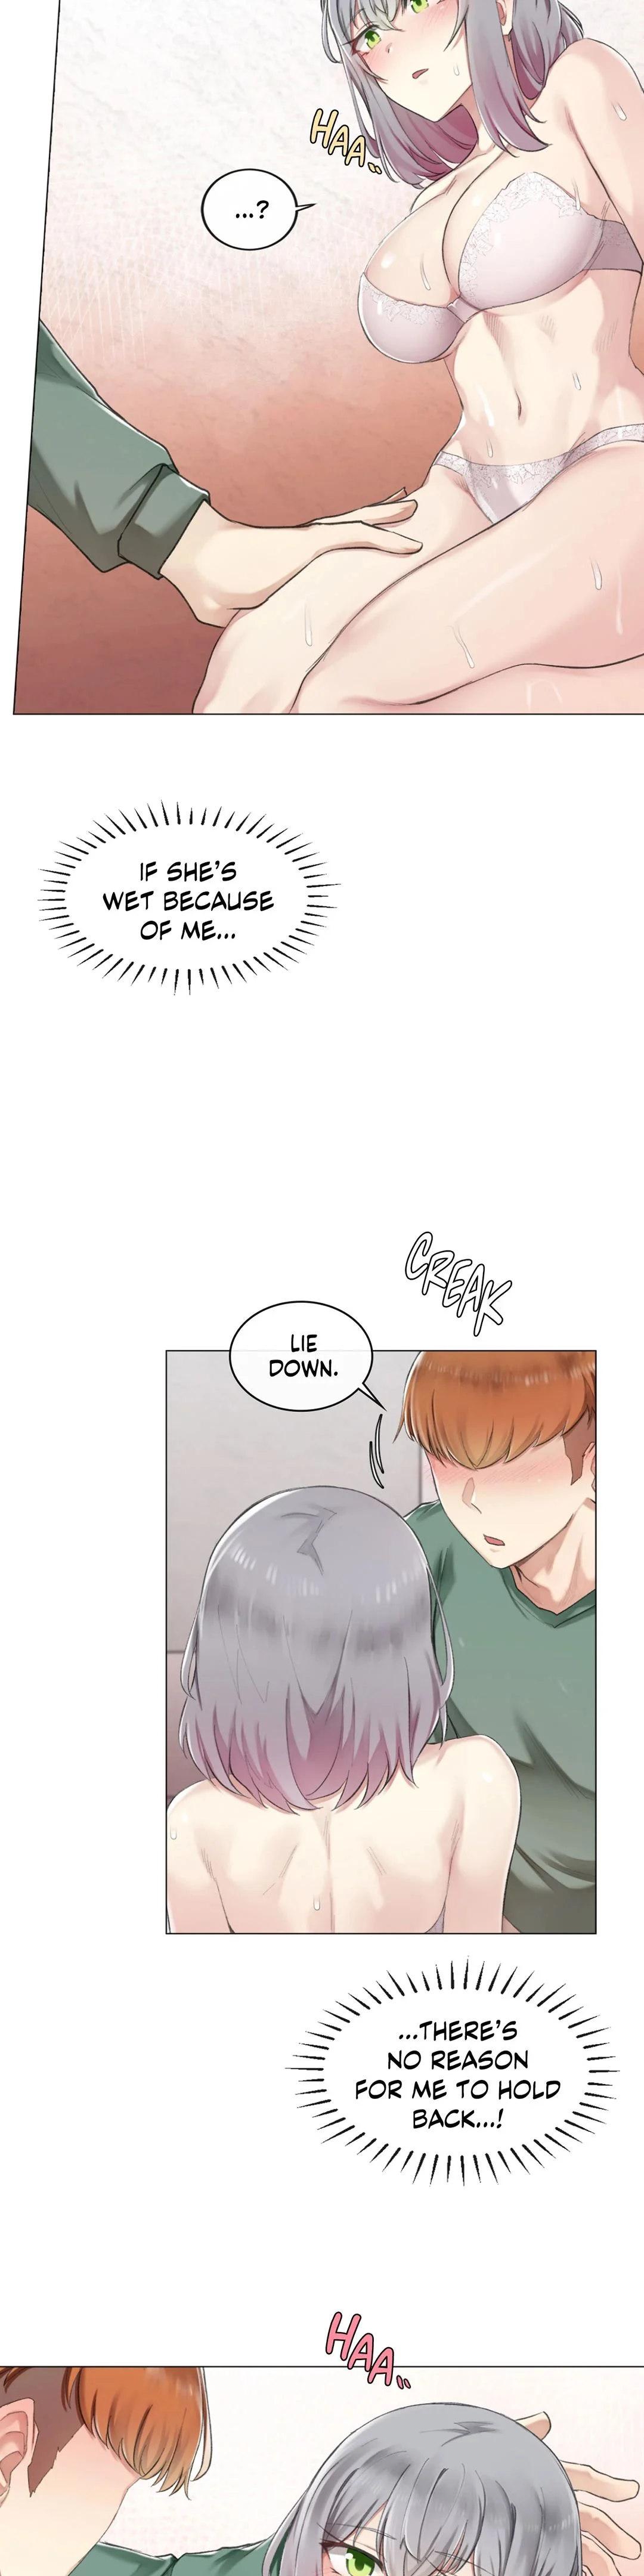 [Dumangoon, KONG_] Sexcape Room: Snap Off Ch.7/7 [English] [Manhwa PDF] Completed 78